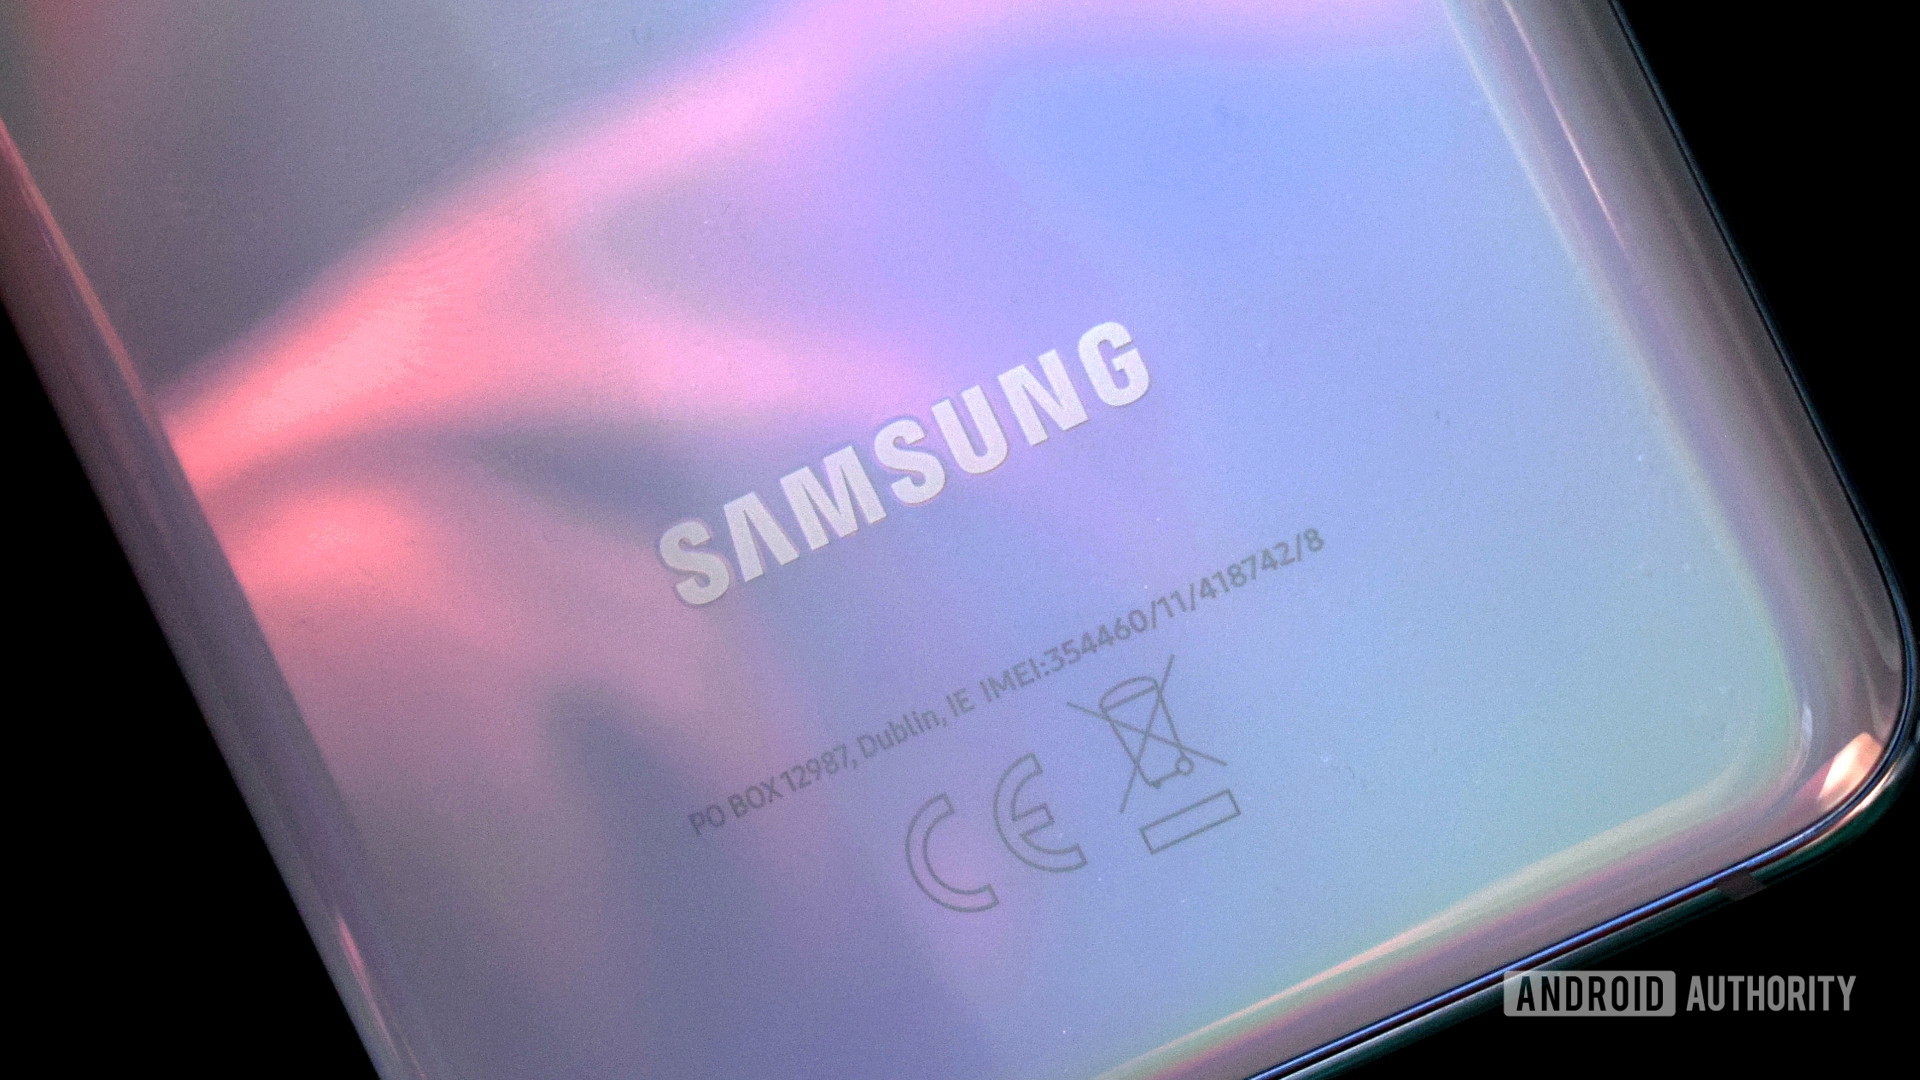 Reserve your Samsung Galaxy S22 or Galaxy Tab S8 now, earn $50 credit - Android Authority